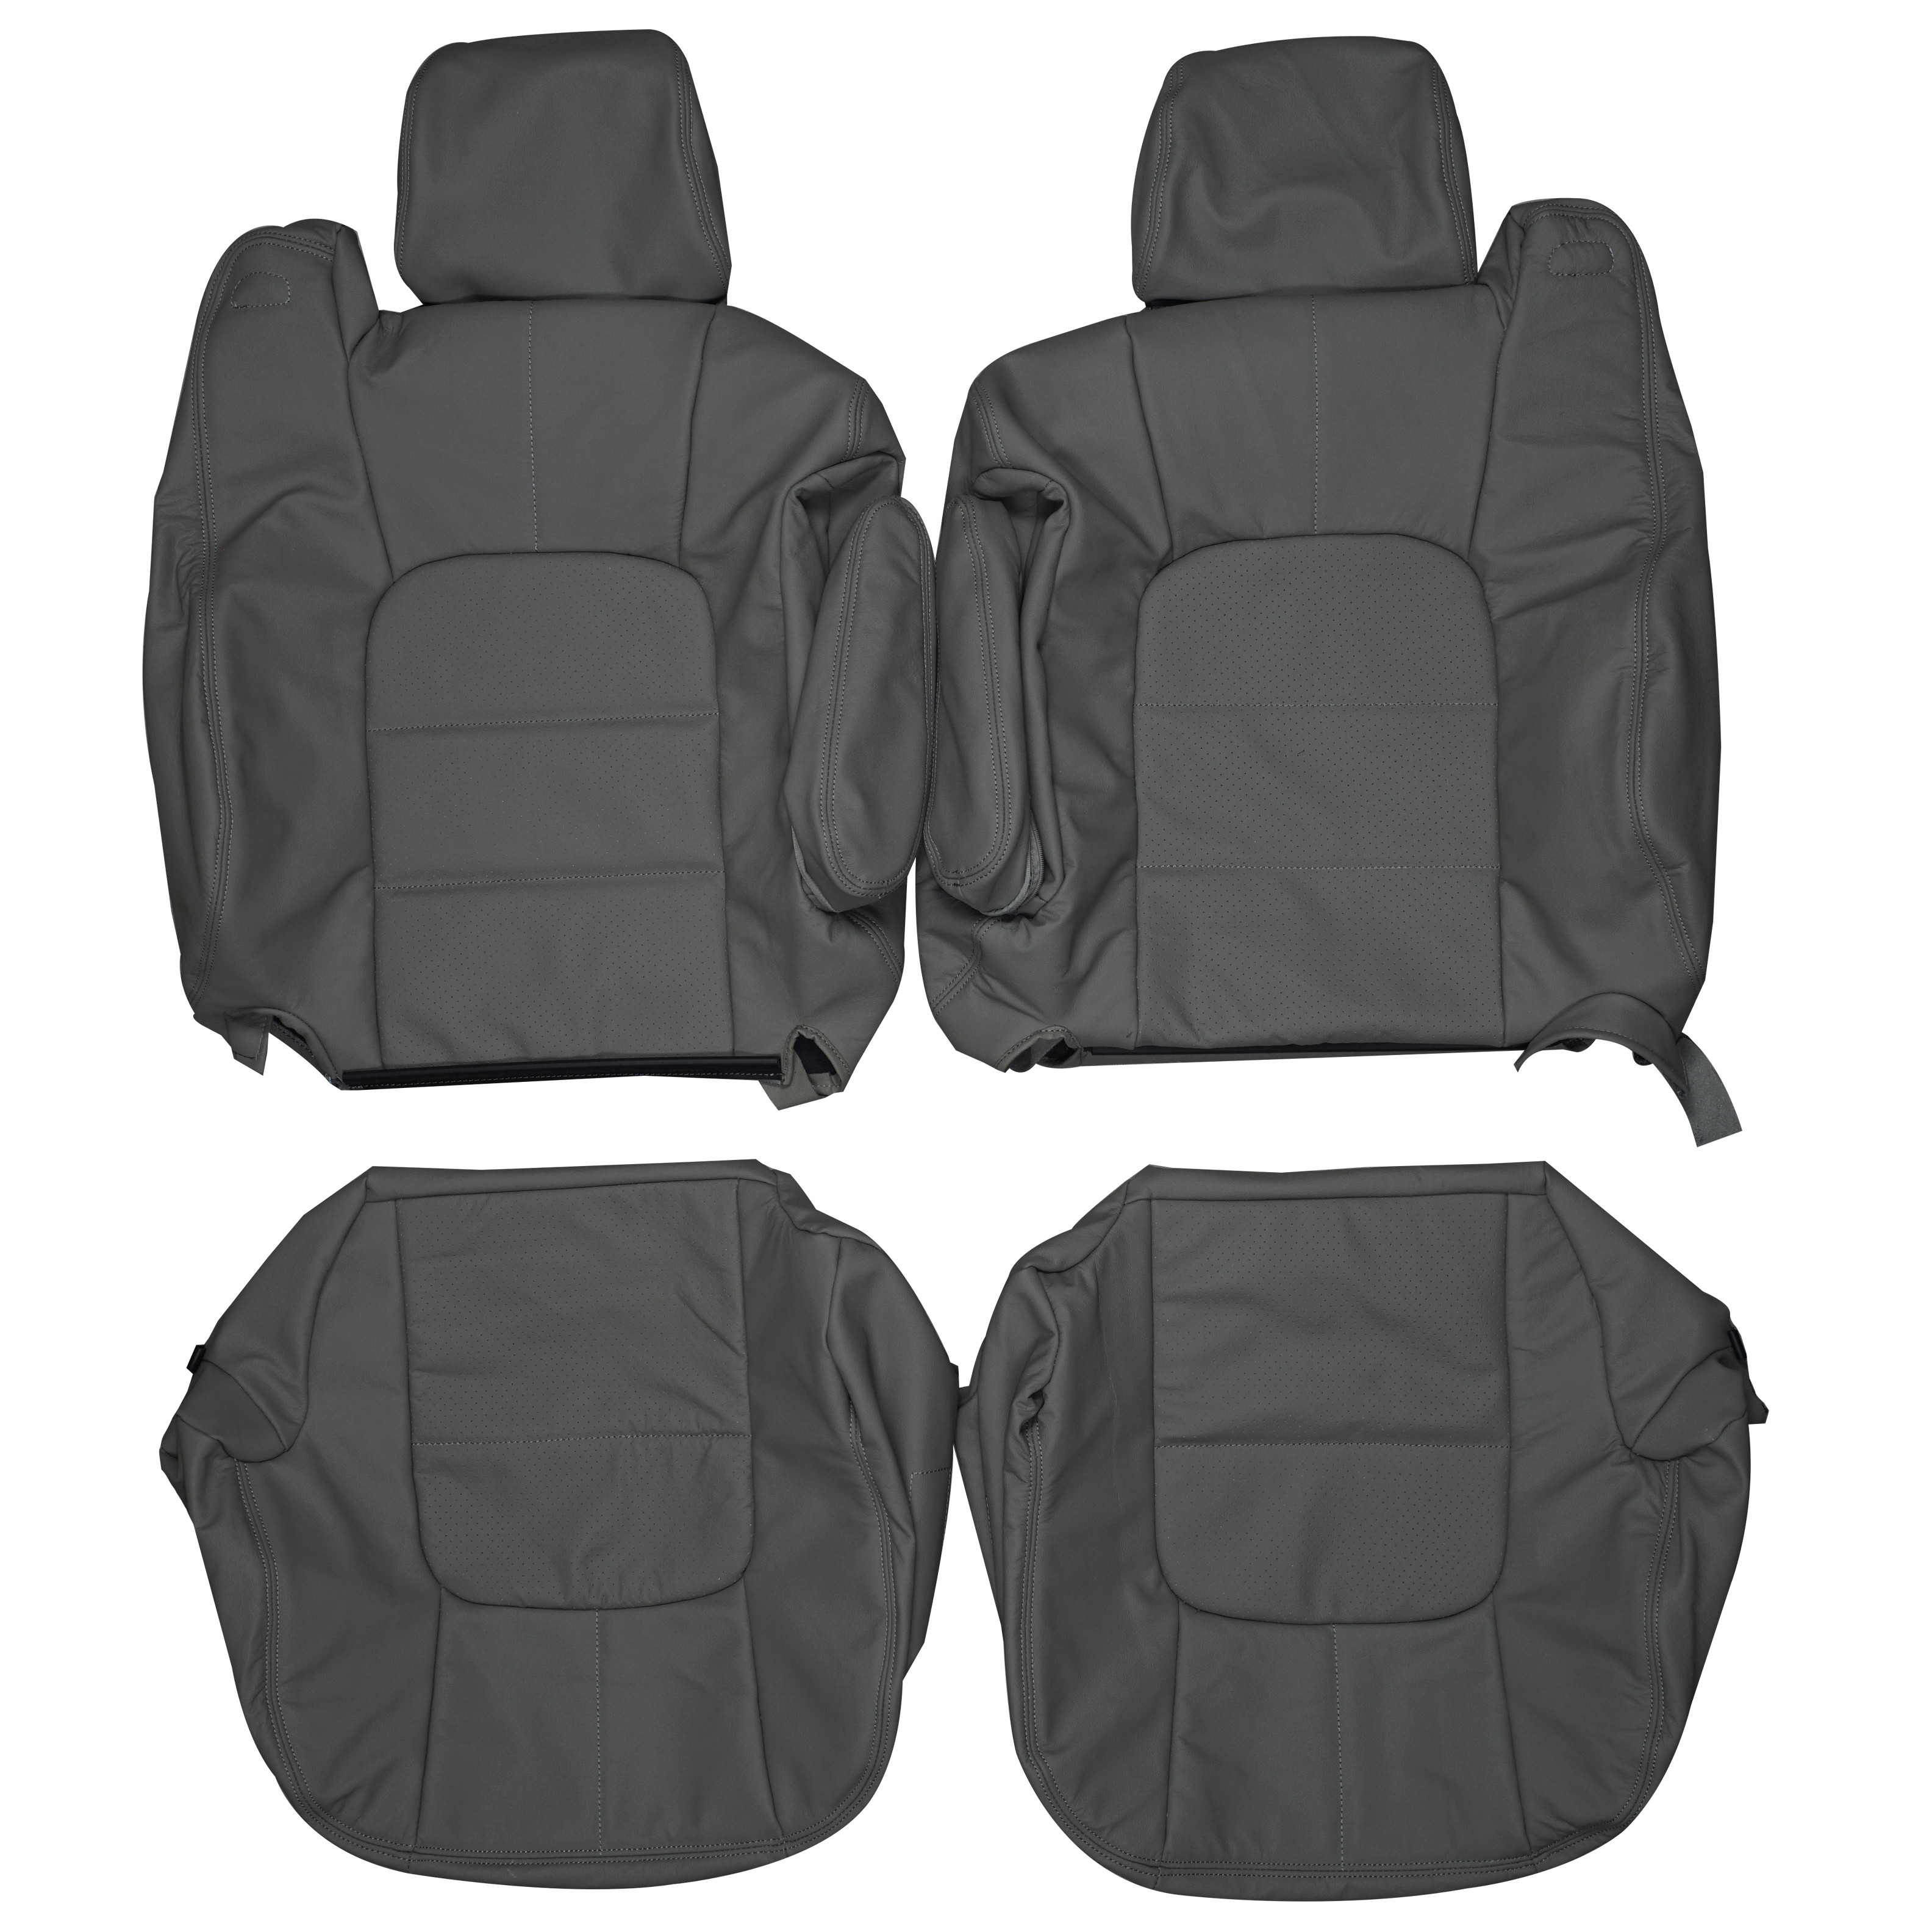 2002 Cadillac Escalade EXT Custom Real Leather Seat Covers (Front) -  Lseat.com